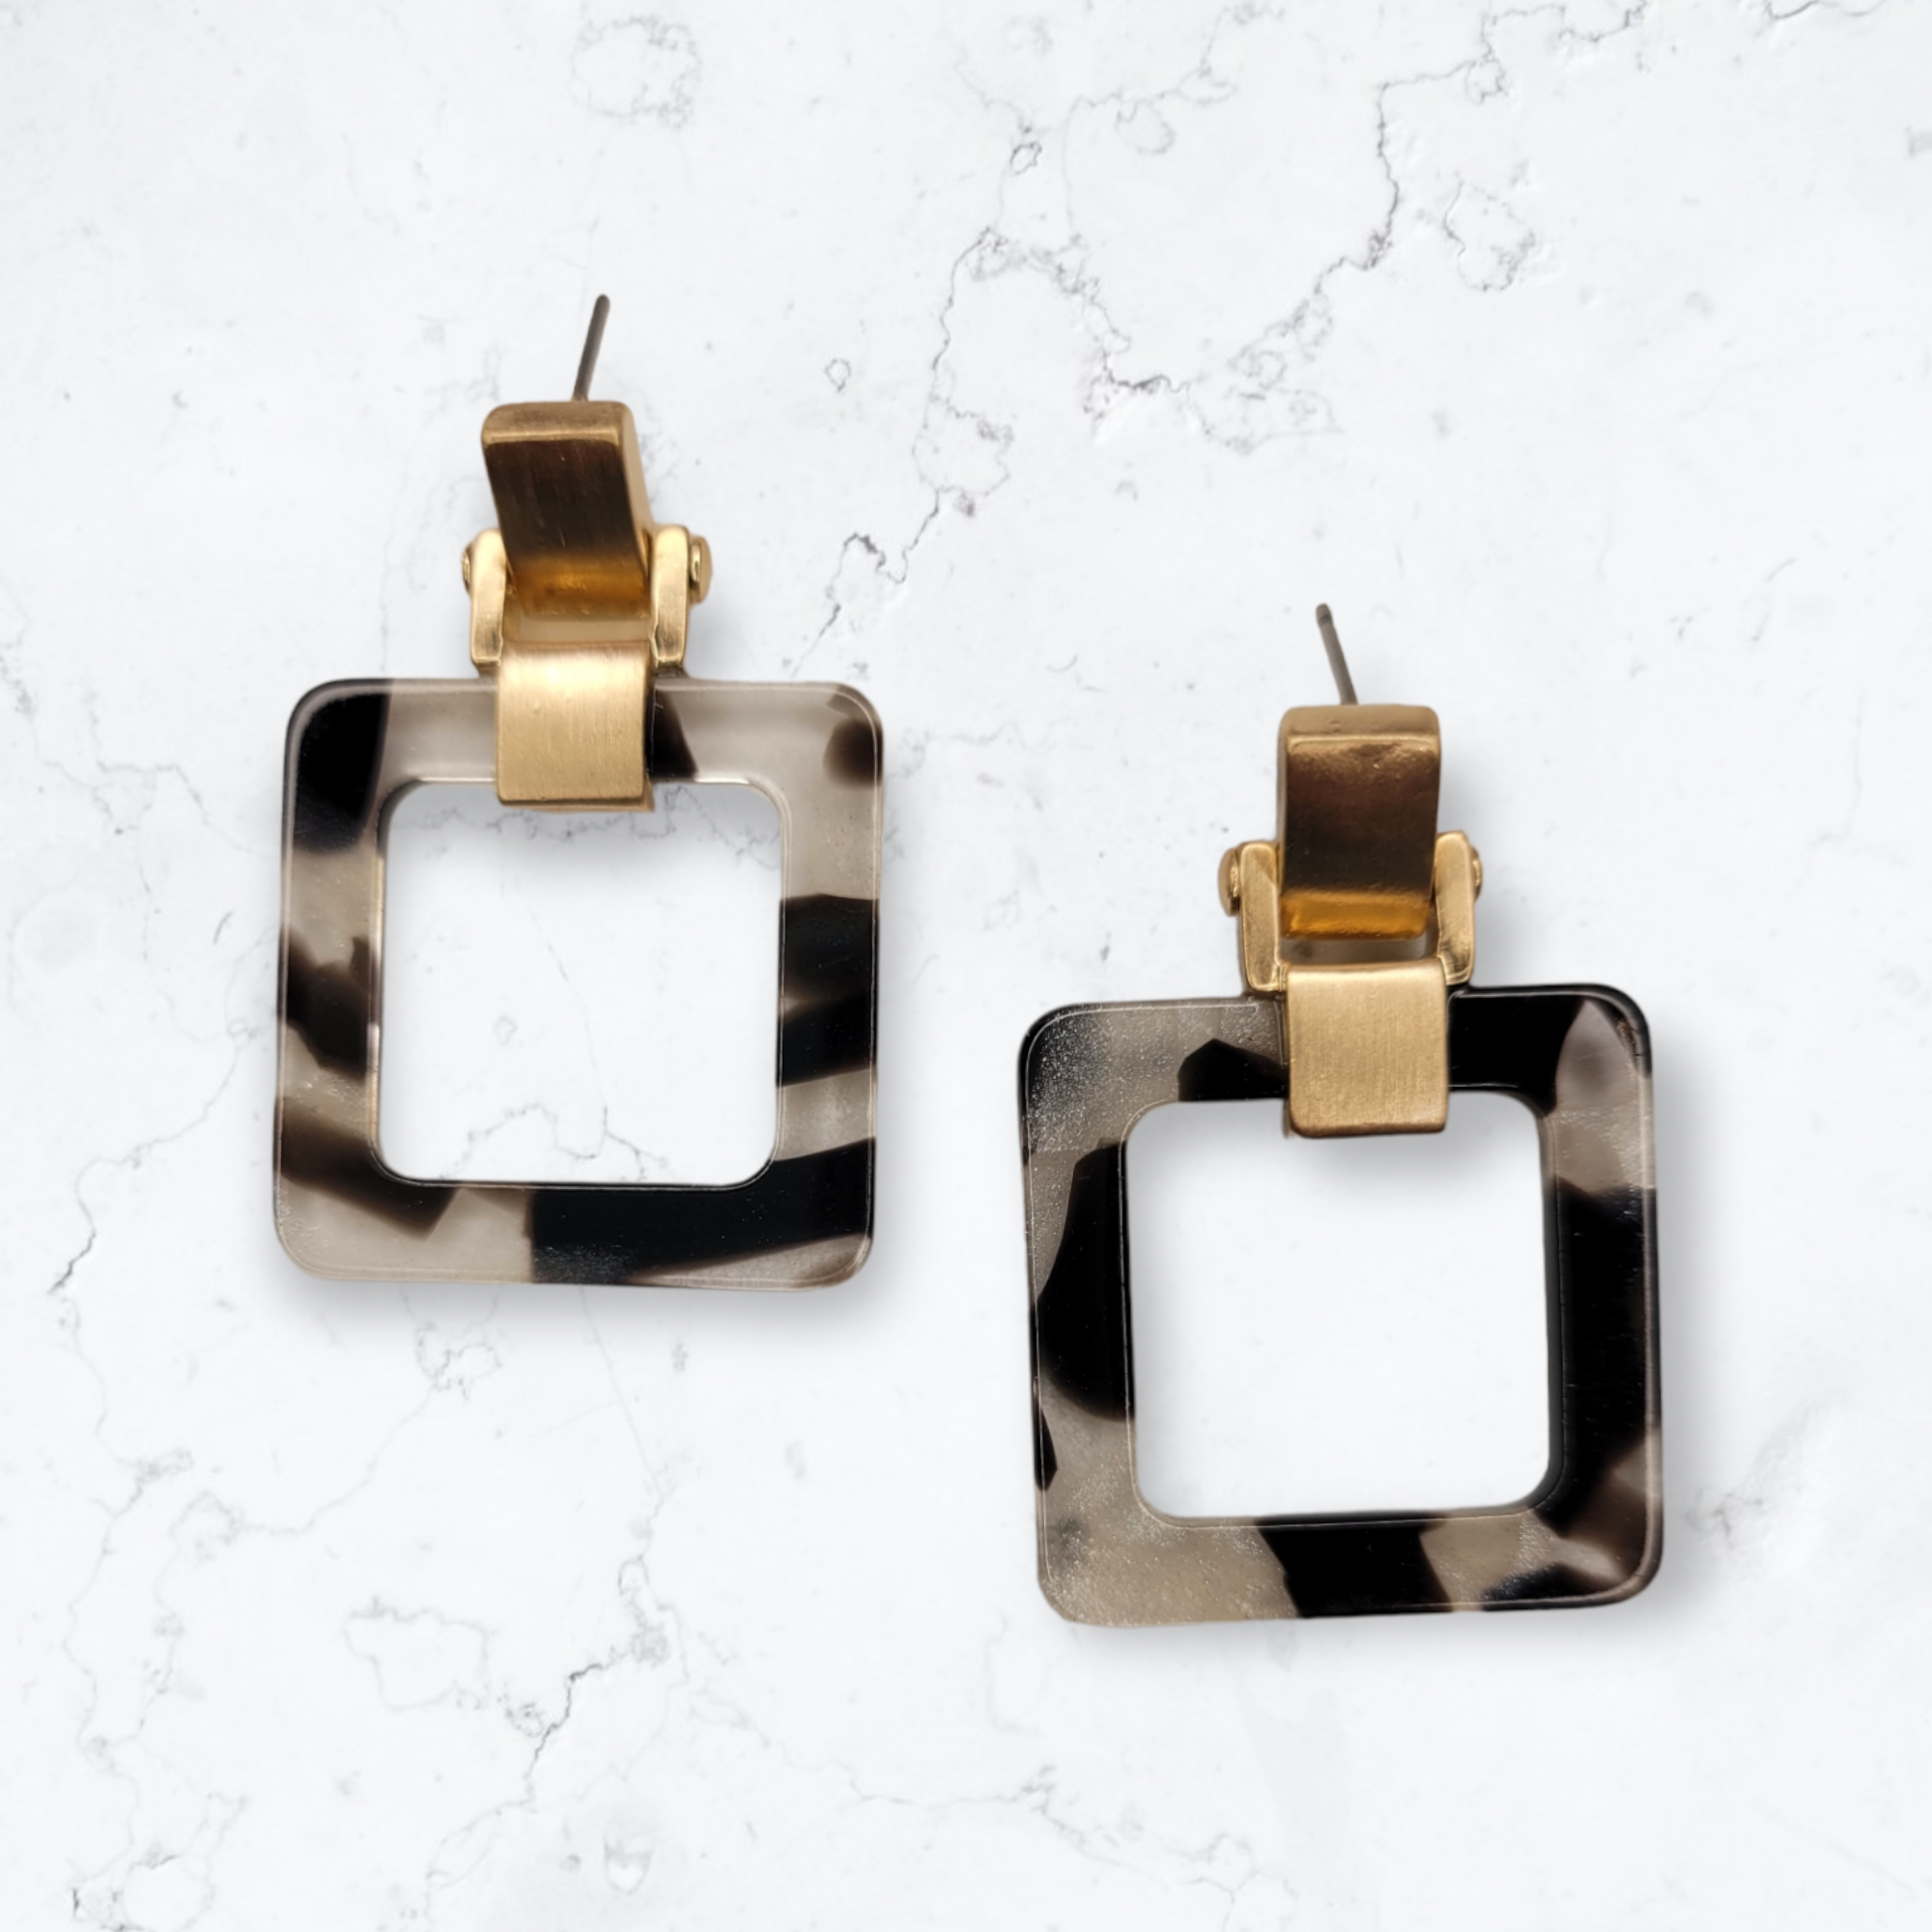 Black Square Acrylic Earrings-Earrings-LouisGeorge Boutique-LouisGeorge Boutique, Women’s Fashion Boutique Located in Trussville, Alabama